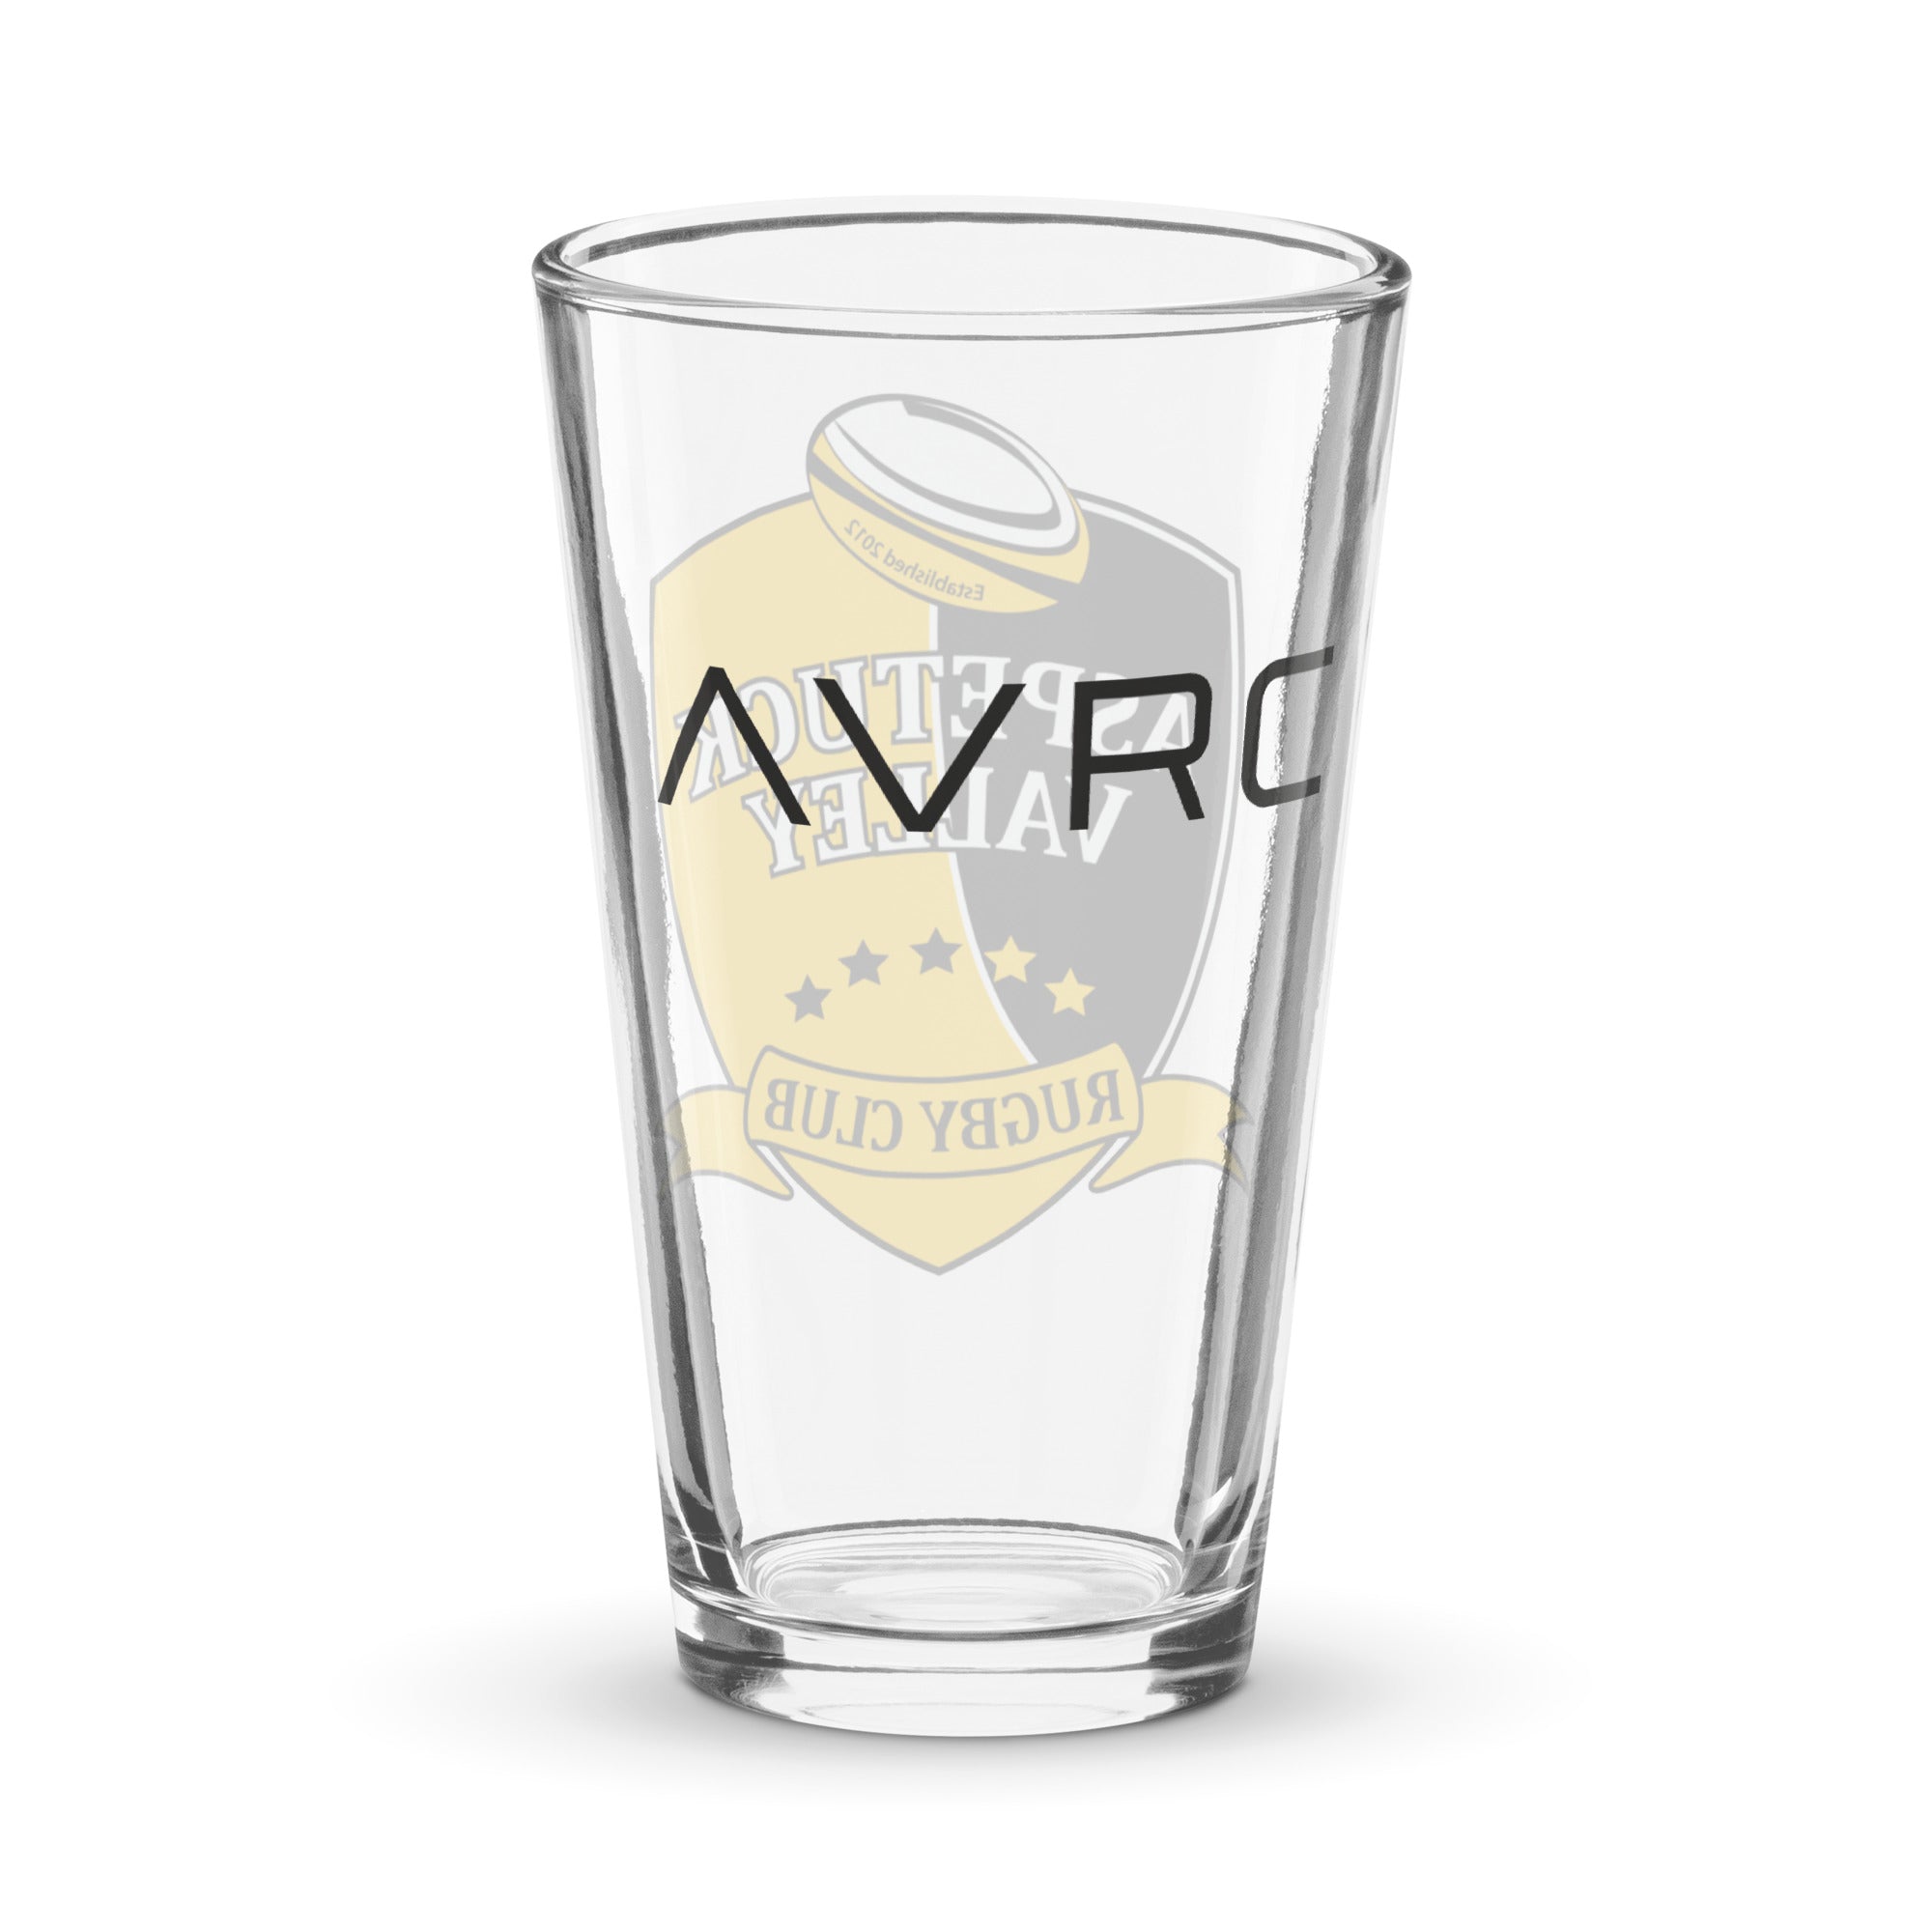 Rugby Imports Aspetuck Valley Rugby Pint Glass